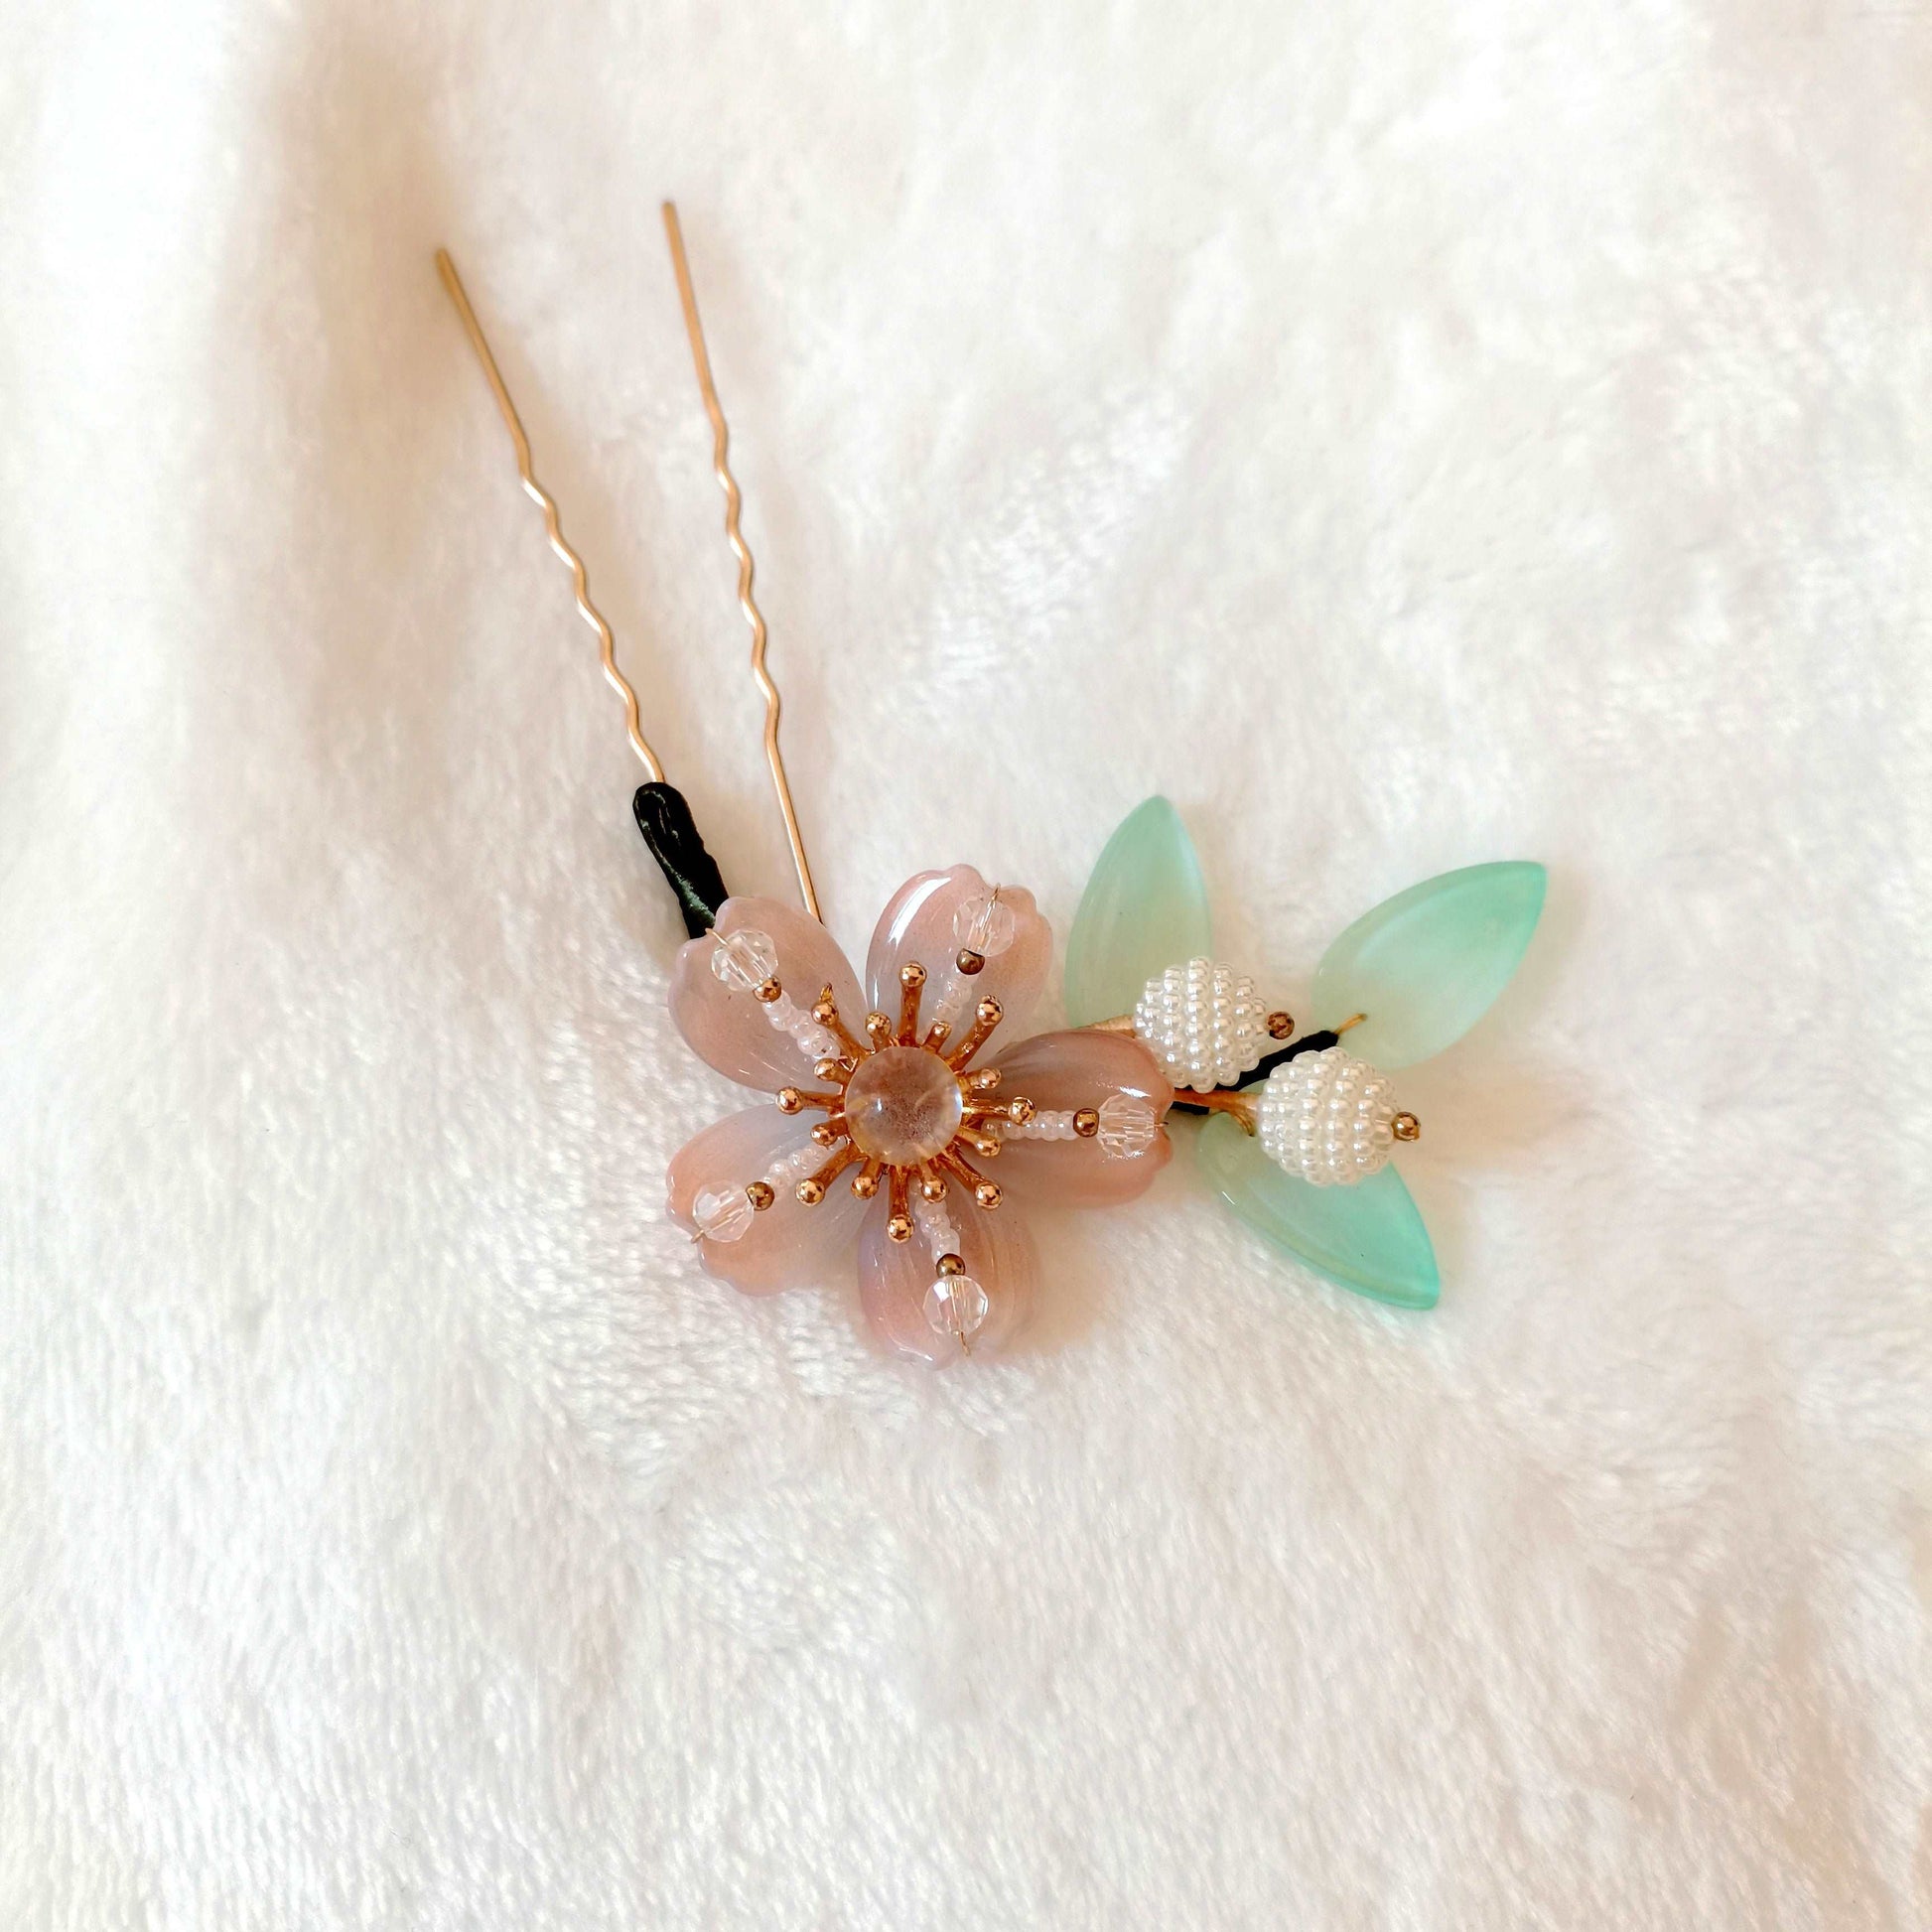 Handmade Hairpins for Stylish Updos